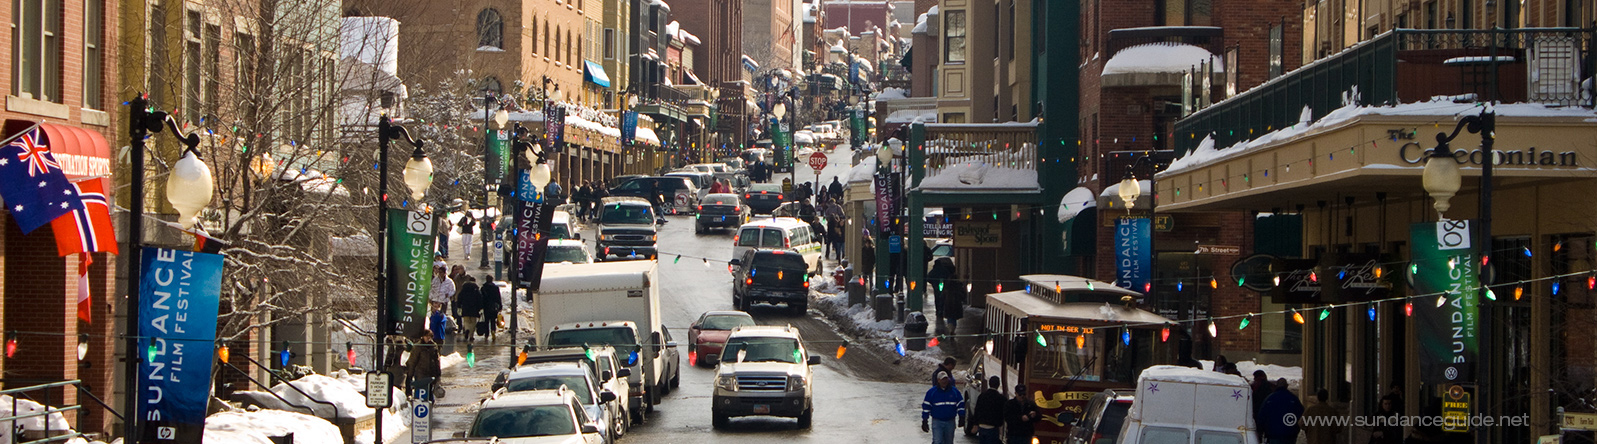 A picture of traffic and shops on Main Street, Park City, Utah